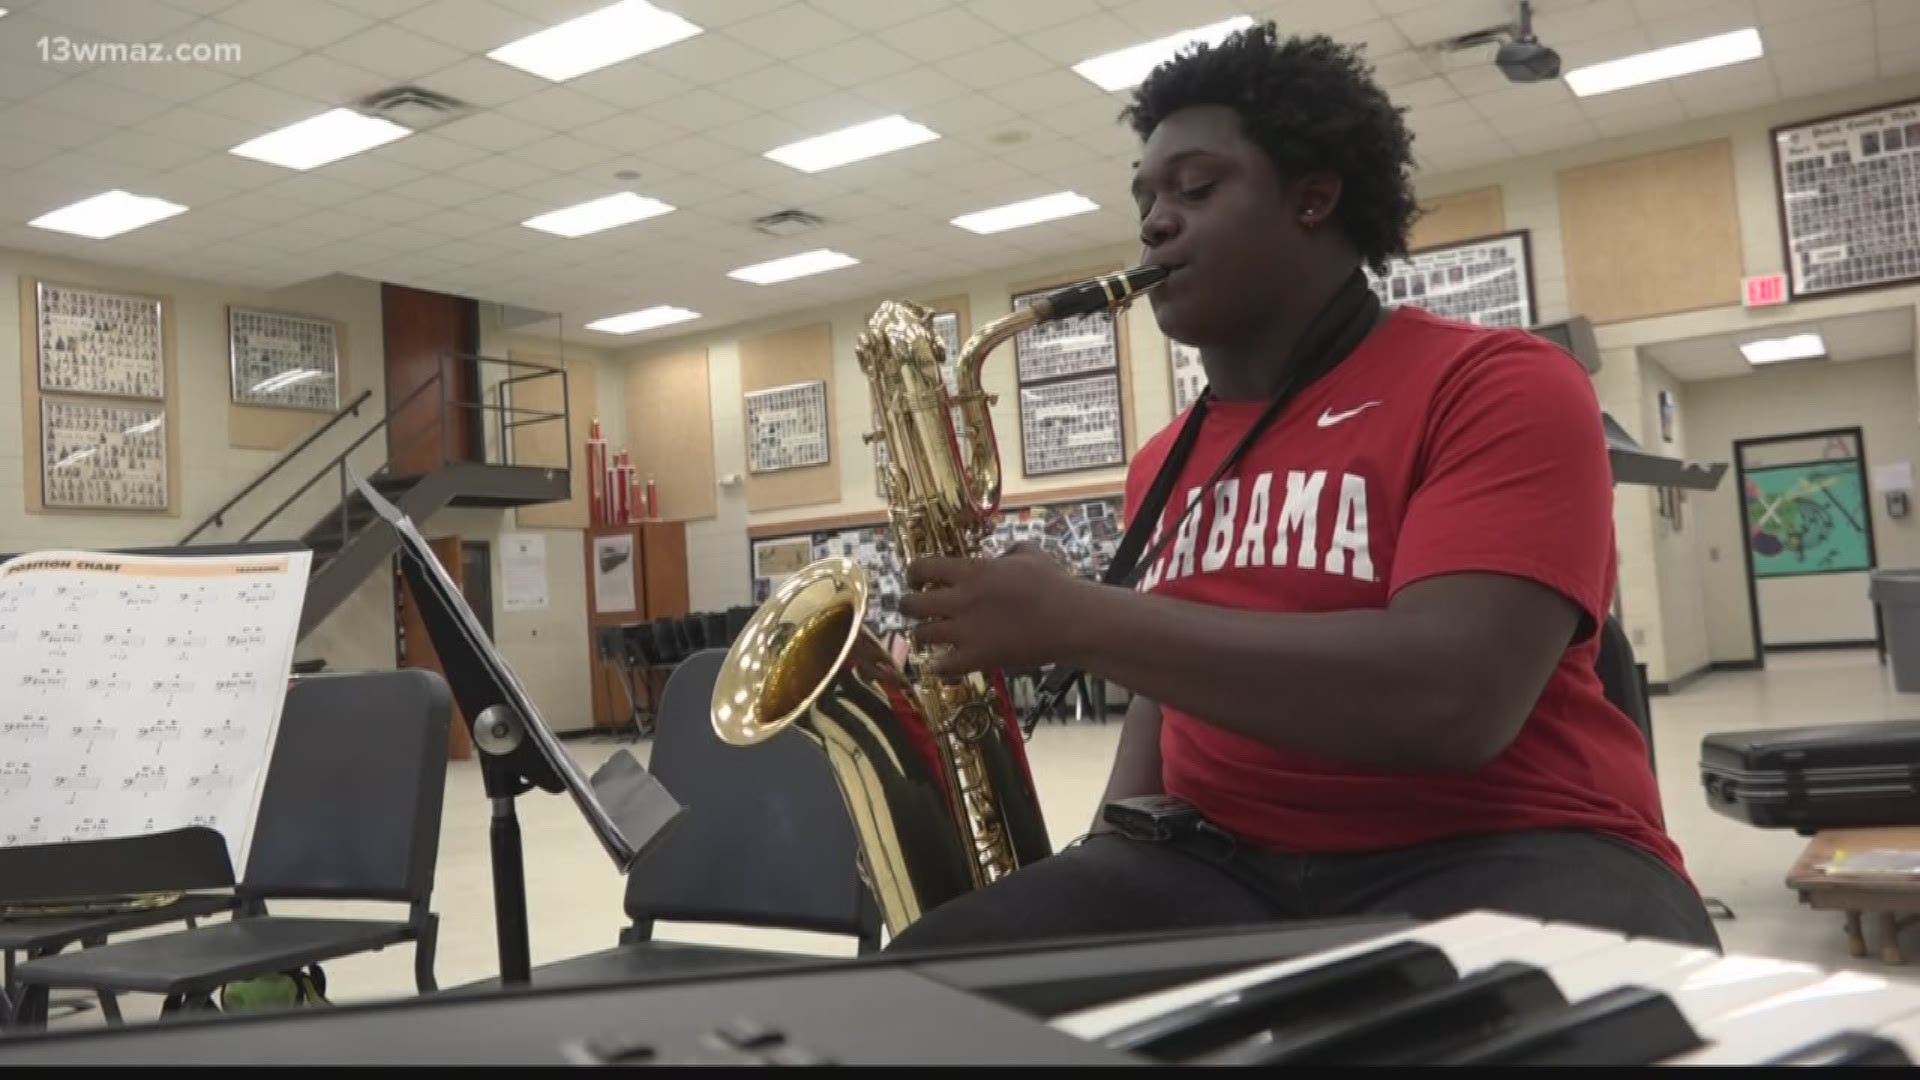 Graduation is right around the corner at Peach County High School, and one student on the marching band has earned his spot at the University of Alabama. Kayla Solomon introduces us to the newest addition to the Million Dollar Band.